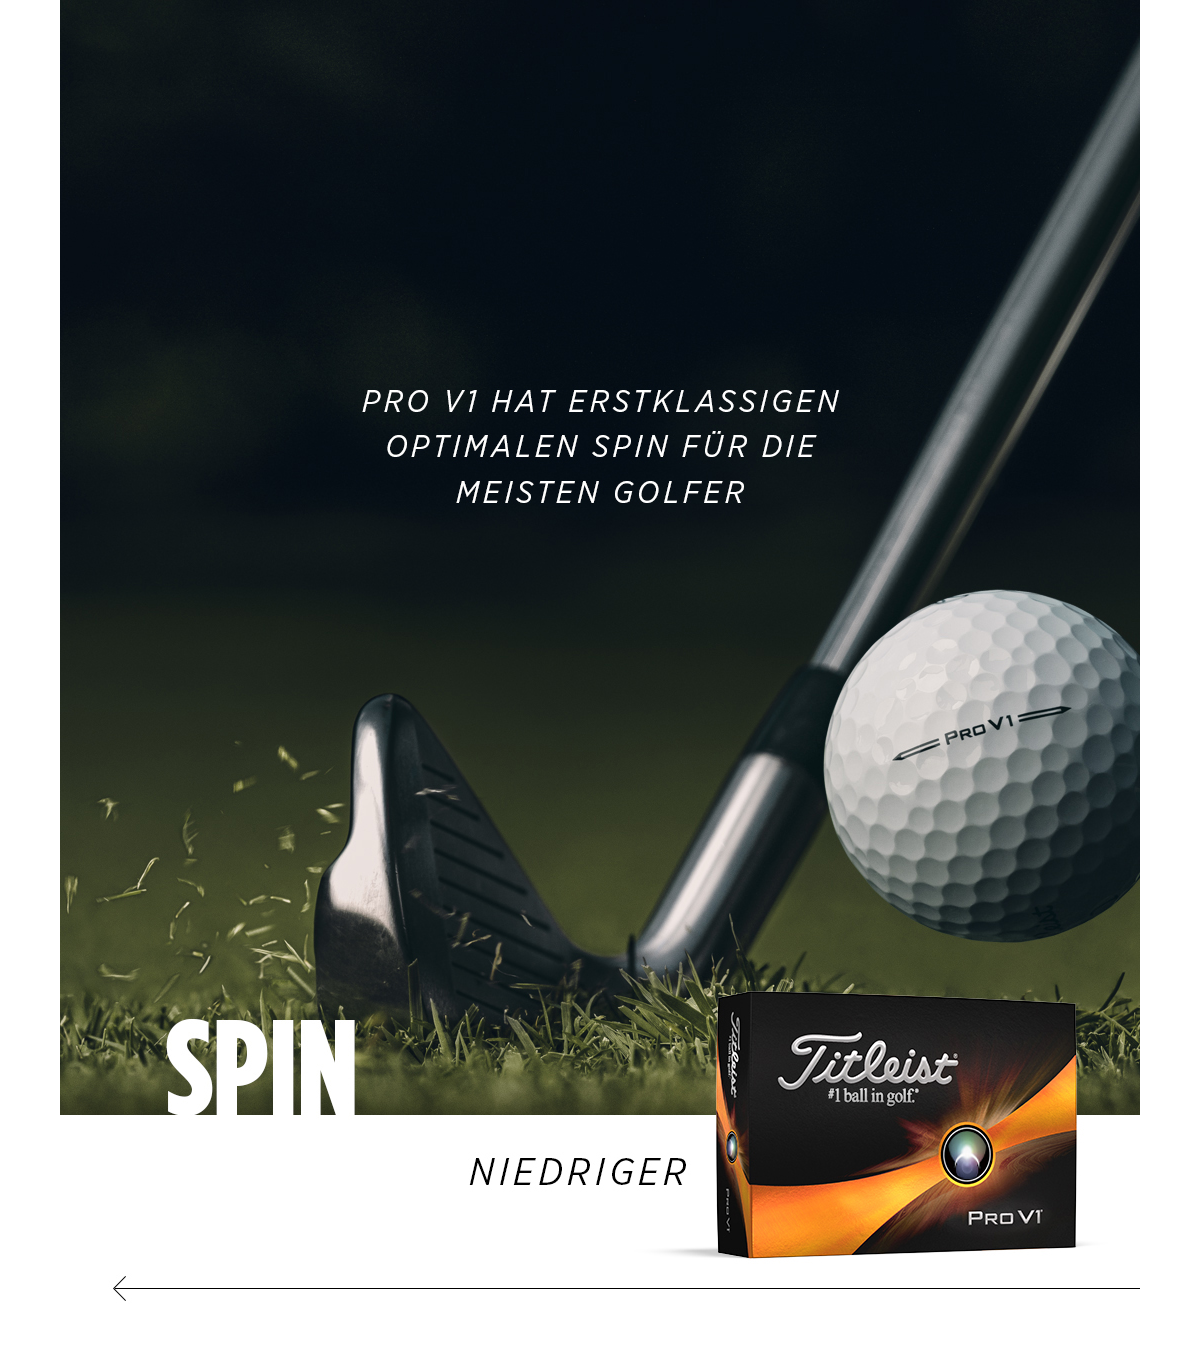 Pro V1 has premium optimal spin for most golfers 